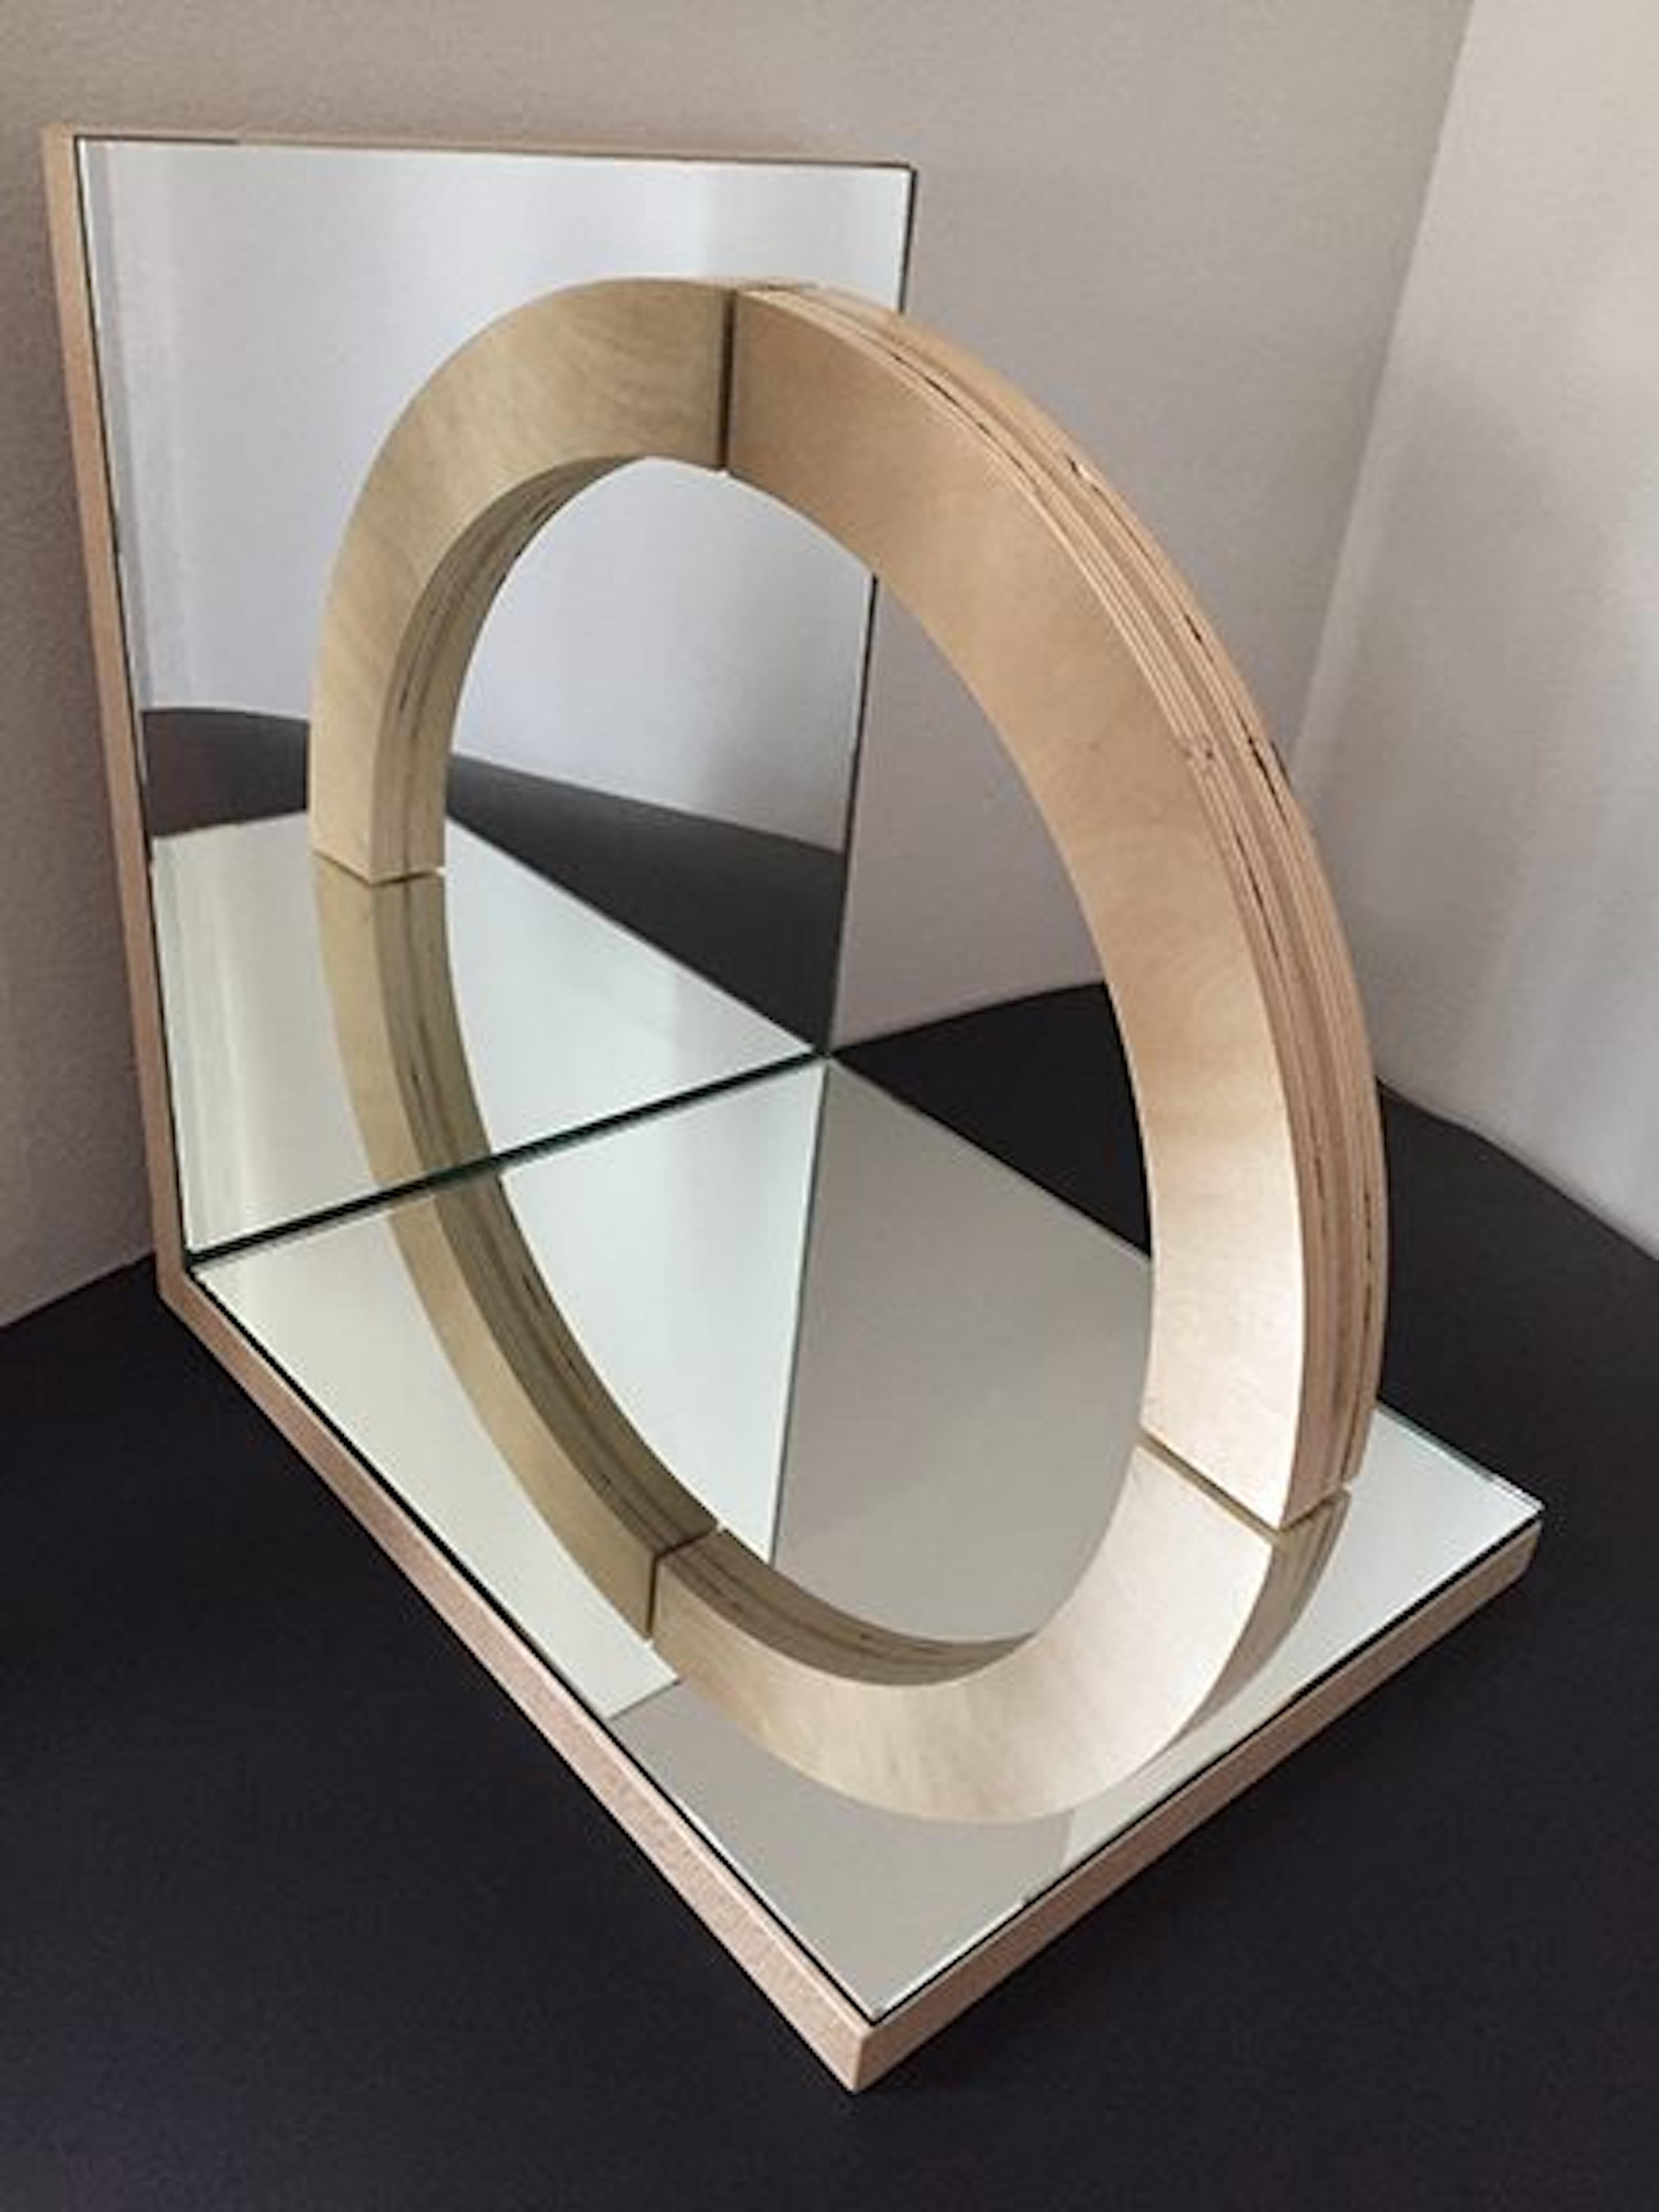 Ron Ulicny Abstract Sculpture - Mini Arc (The Great Arc edition)